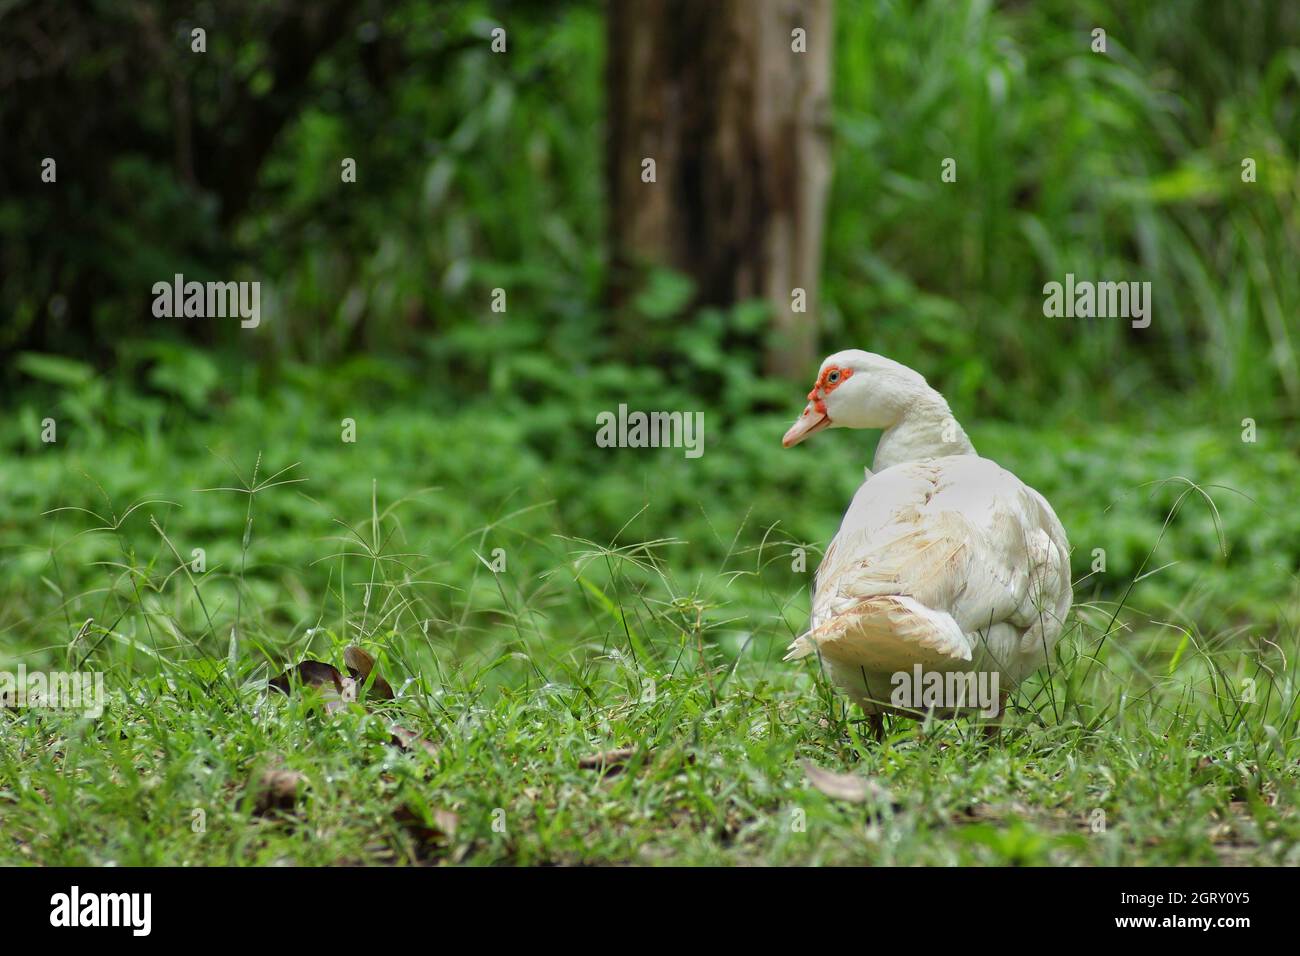 Rear View Of Duck Perching On Grassy Field Stock Photo